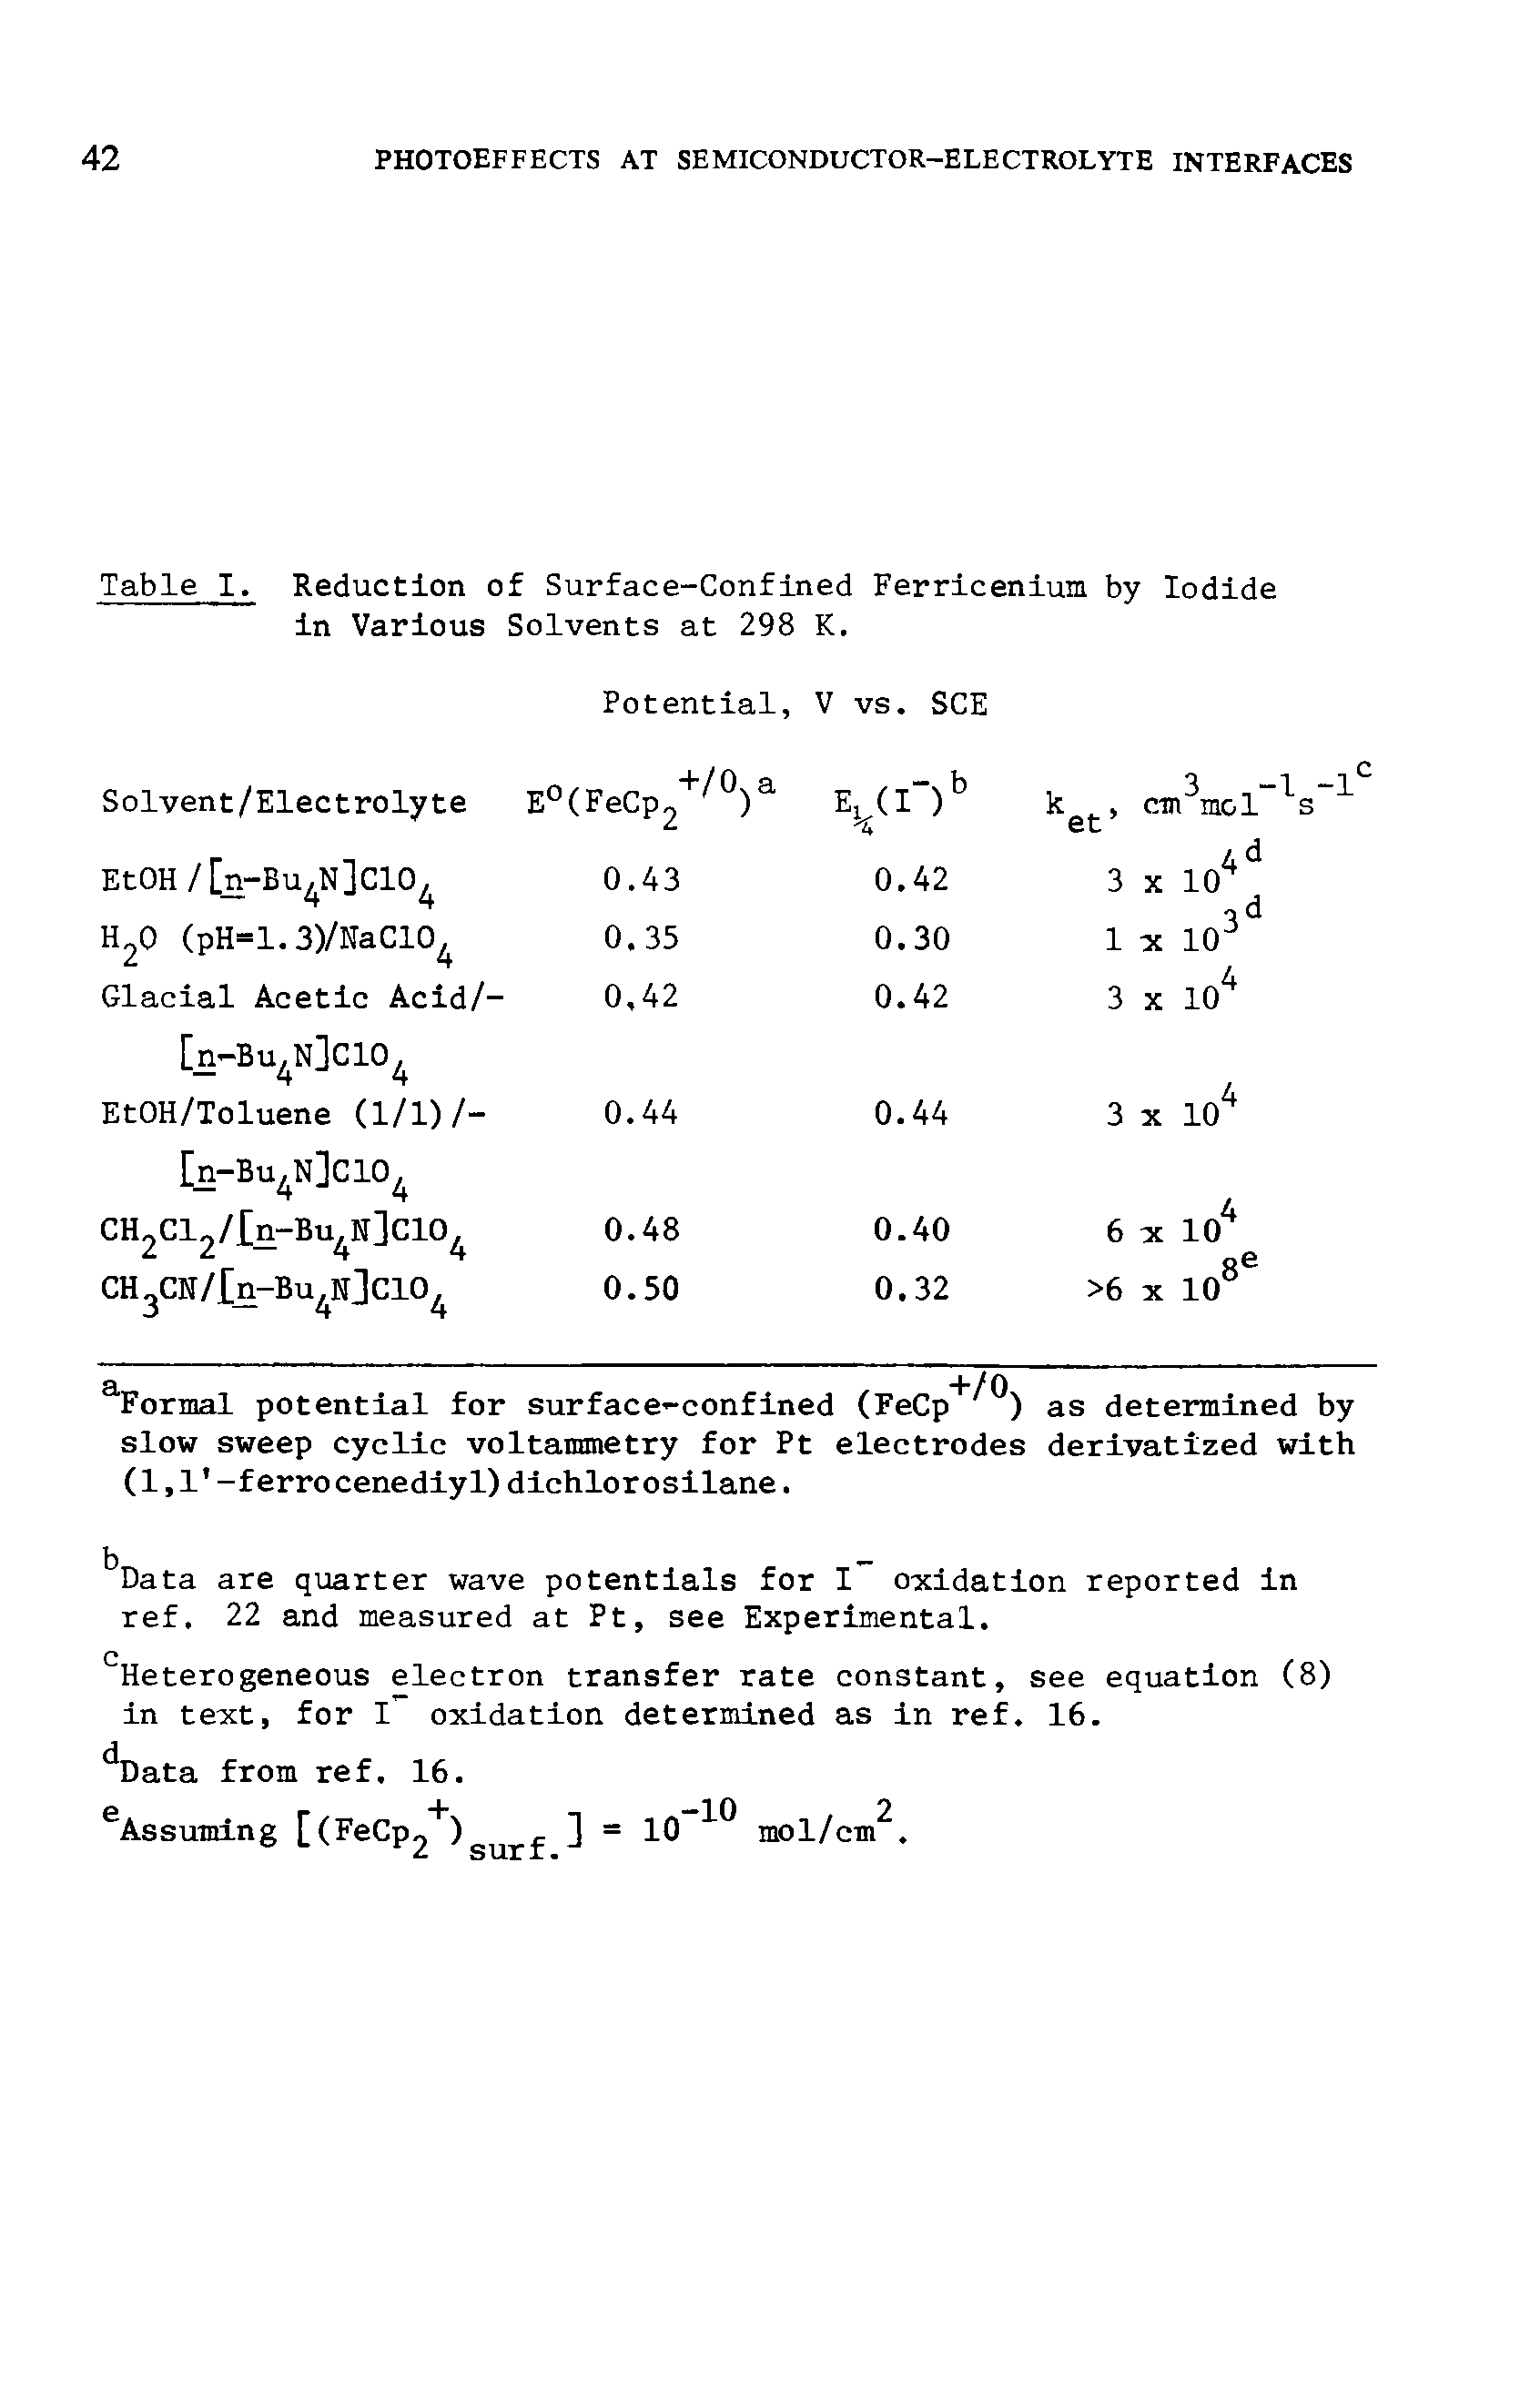 Table I. Reduction of Surface-Confined Ferricenium by Iodide in Various Solvents at 298 K.